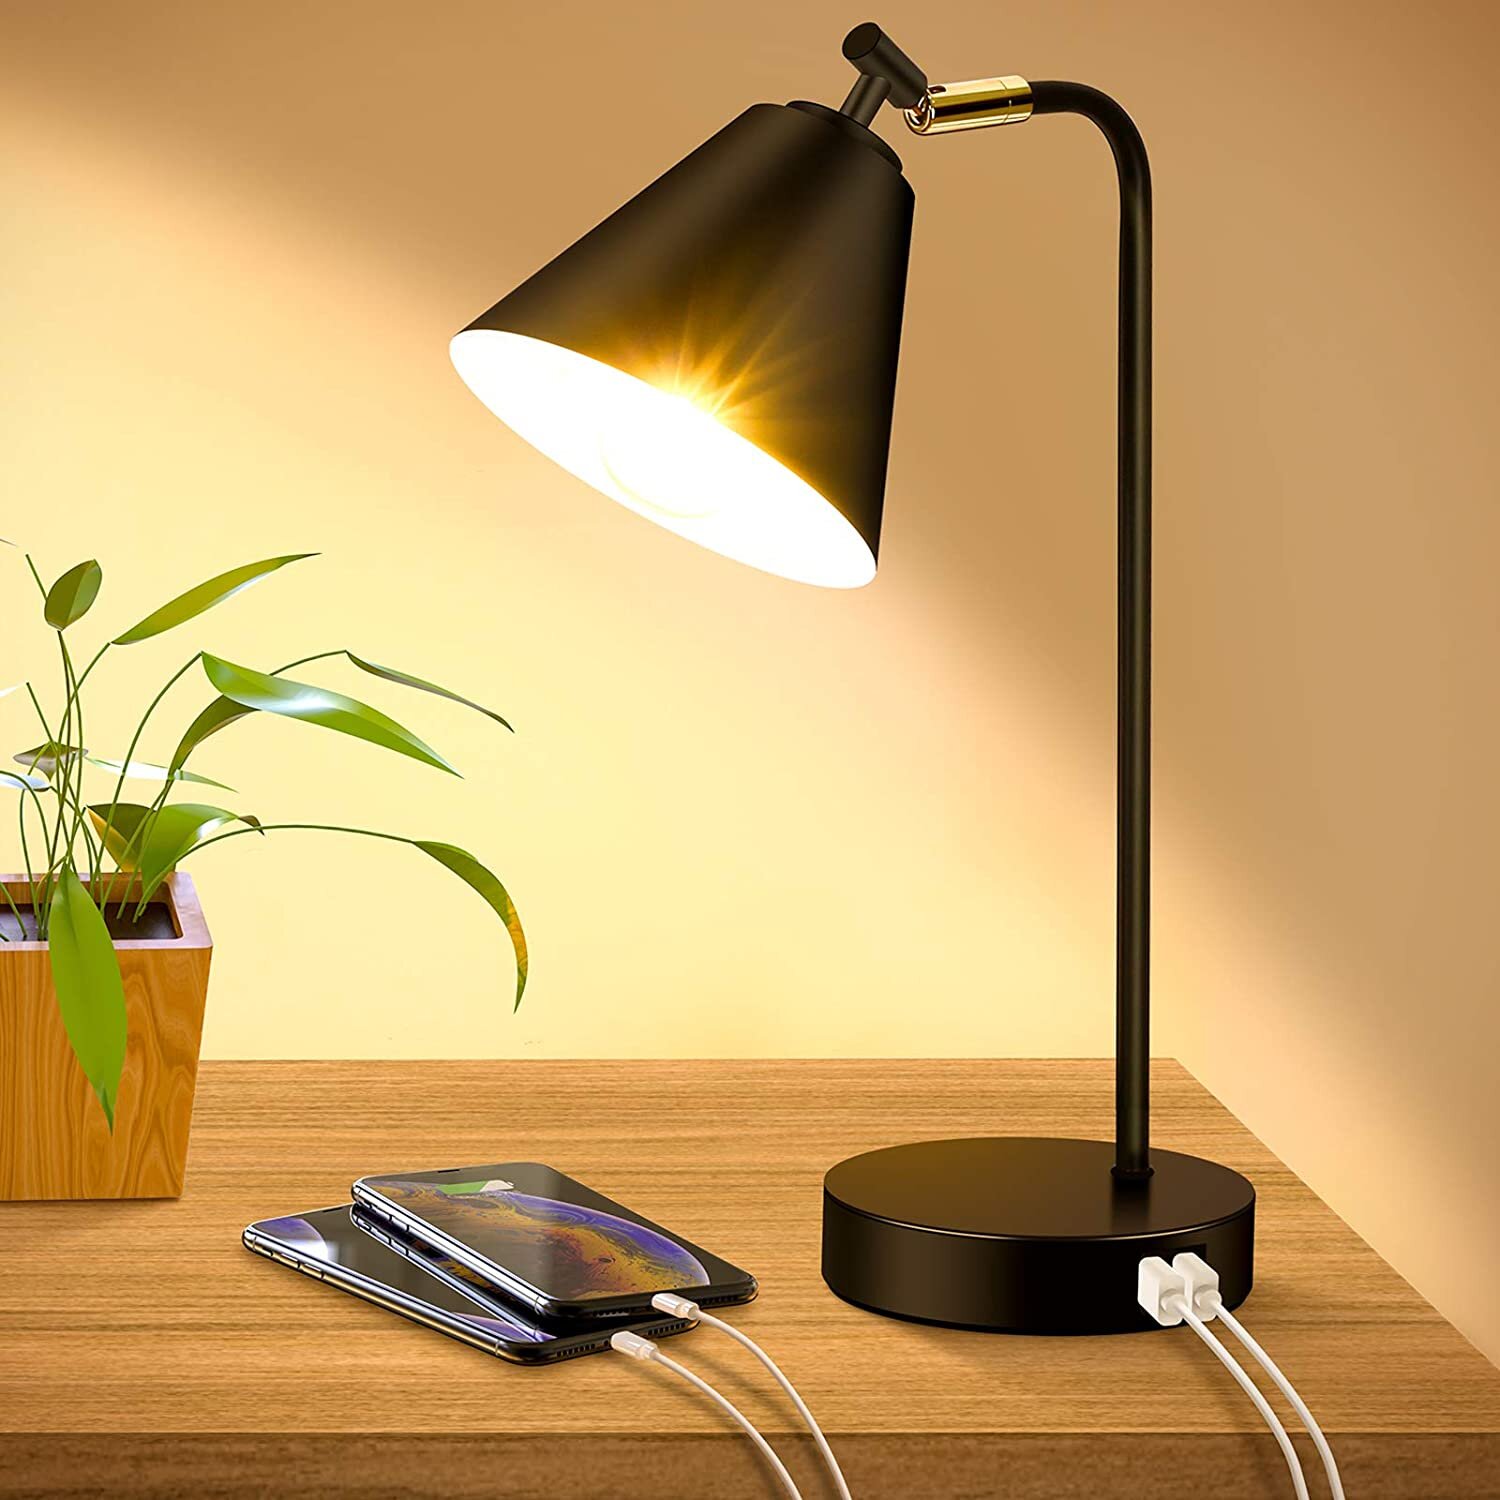 LED Desk Lamp for Home Office, 3 Levels Dimmable Desk Light with USB  Charging Port, Small Study Lamp, Reading Light for Table, Black, 5000K 